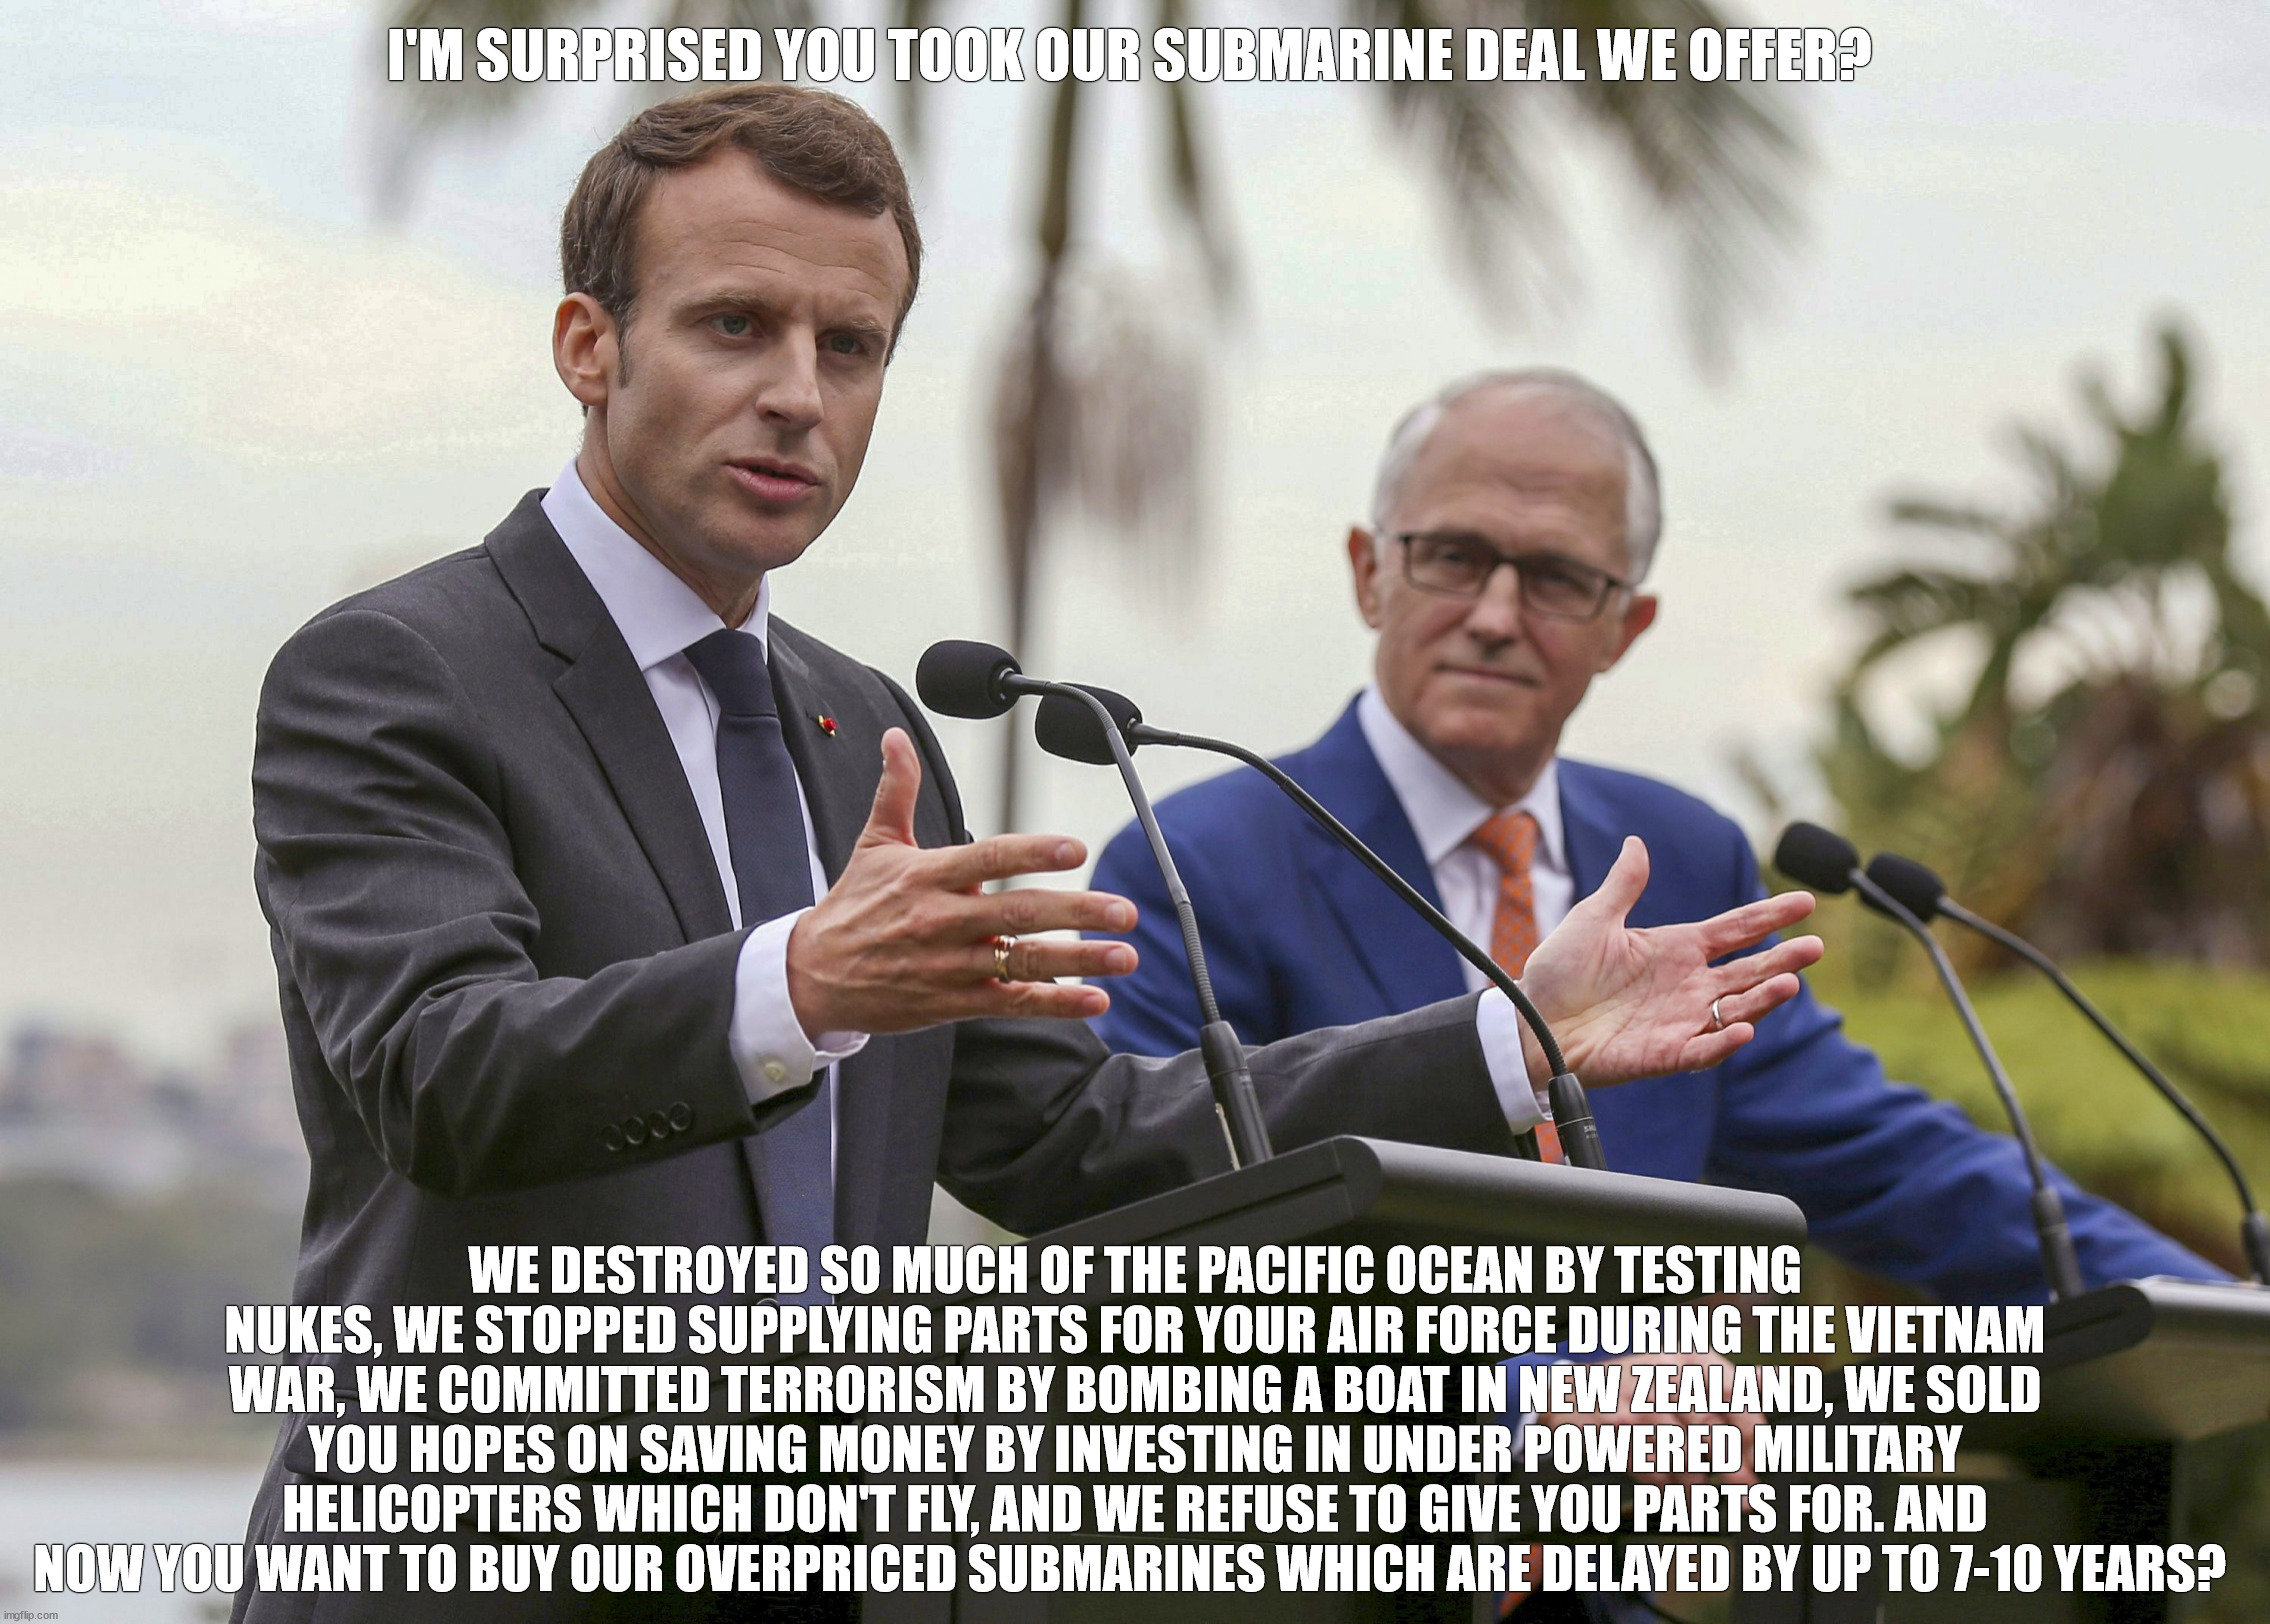 French Submarine Deal with the Australian Government | I'M SURPRISED YOU TOOK OUR SUBMARINE DEAL WE OFFER? WE DESTROYED SO MUCH OF THE PACIFIC OCEAN BY TESTING NUKES, WE STOPPED SUPPLYING PARTS FOR YOUR AIR FORCE DURING THE VIETNAM WAR, WE COMMITTED TERRORISM BY BOMBING A BOAT IN NEW ZEALAND, WE SOLD YOU HOPES ON SAVING MONEY BY INVESTING IN UNDER POWERED MILITARY HELICOPTERS WHICH DON'T FLY, AND WE REFUSE TO GIVE YOU PARTS FOR. AND NOW YOU WANT TO BUY OUR OVERPRICED SUBMARINES WHICH ARE DELAYED BY UP TO 7-10 YEARS? | image tagged in emmanuel macron,malcolm turnbull,french,australian defence force,submarine | made w/ Imgflip meme maker